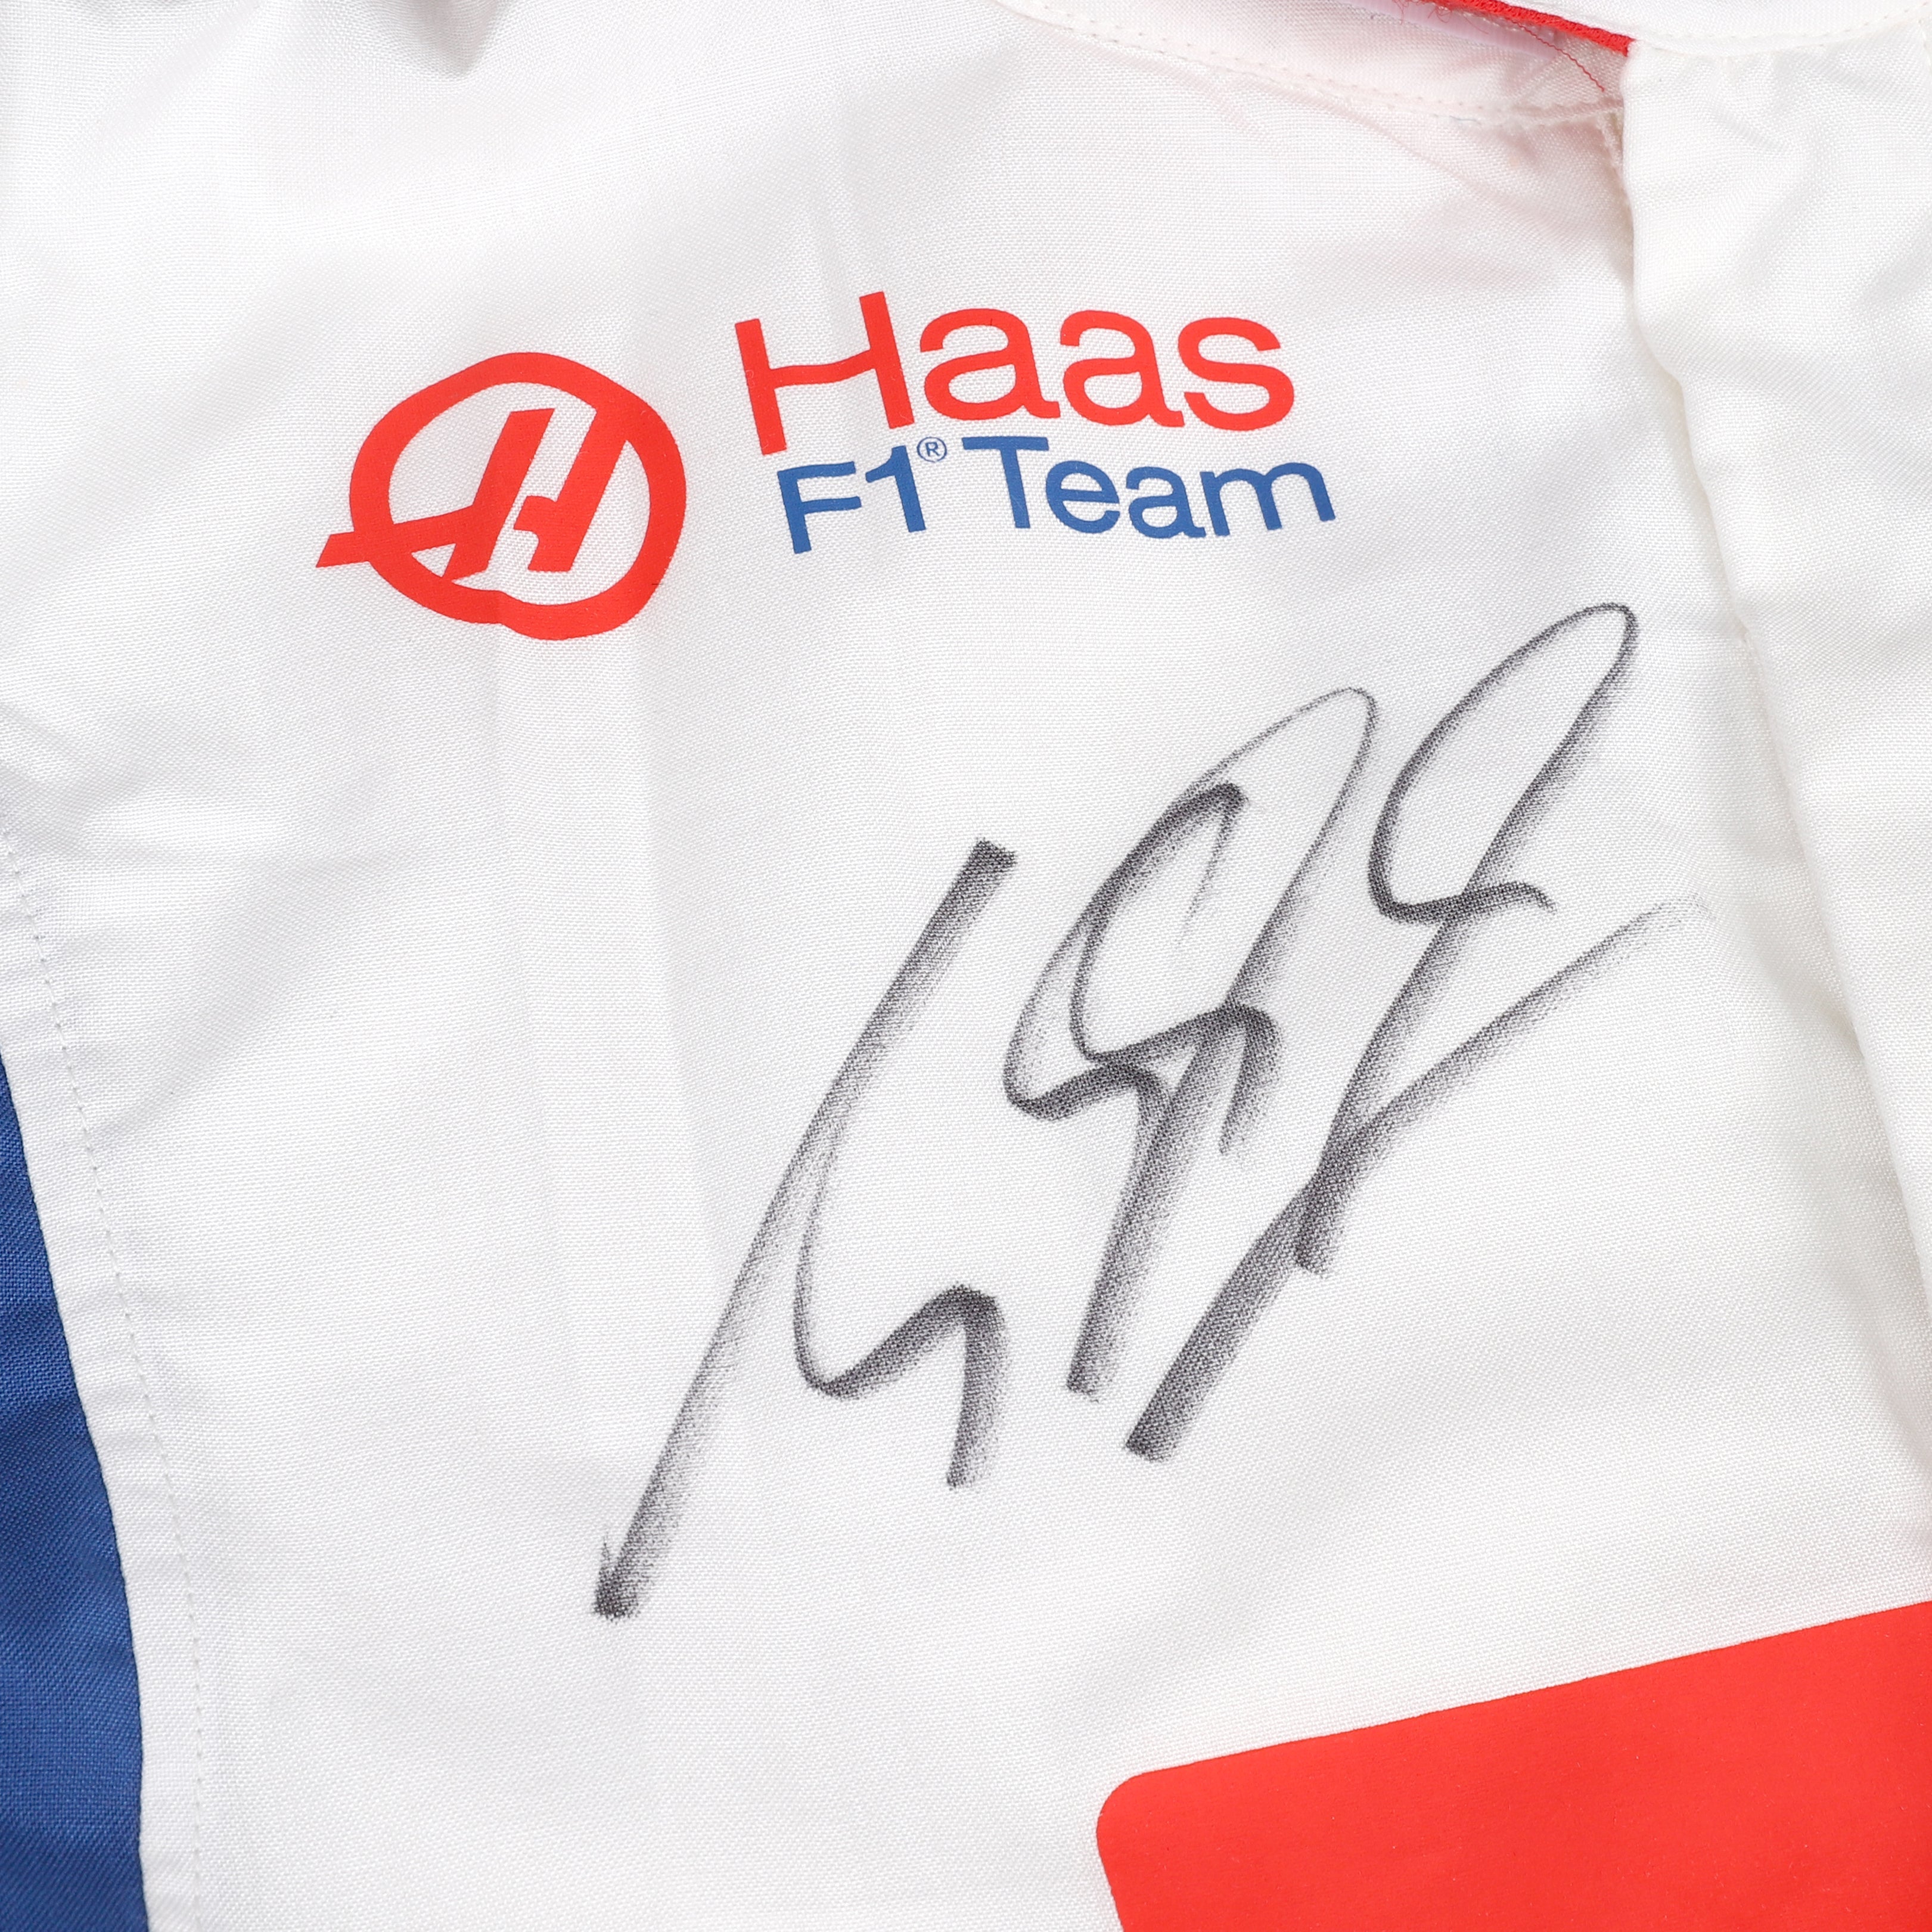 Officially Licensed 2022 Signed Haas F1 Team Suit - Mick Schumacher Edition